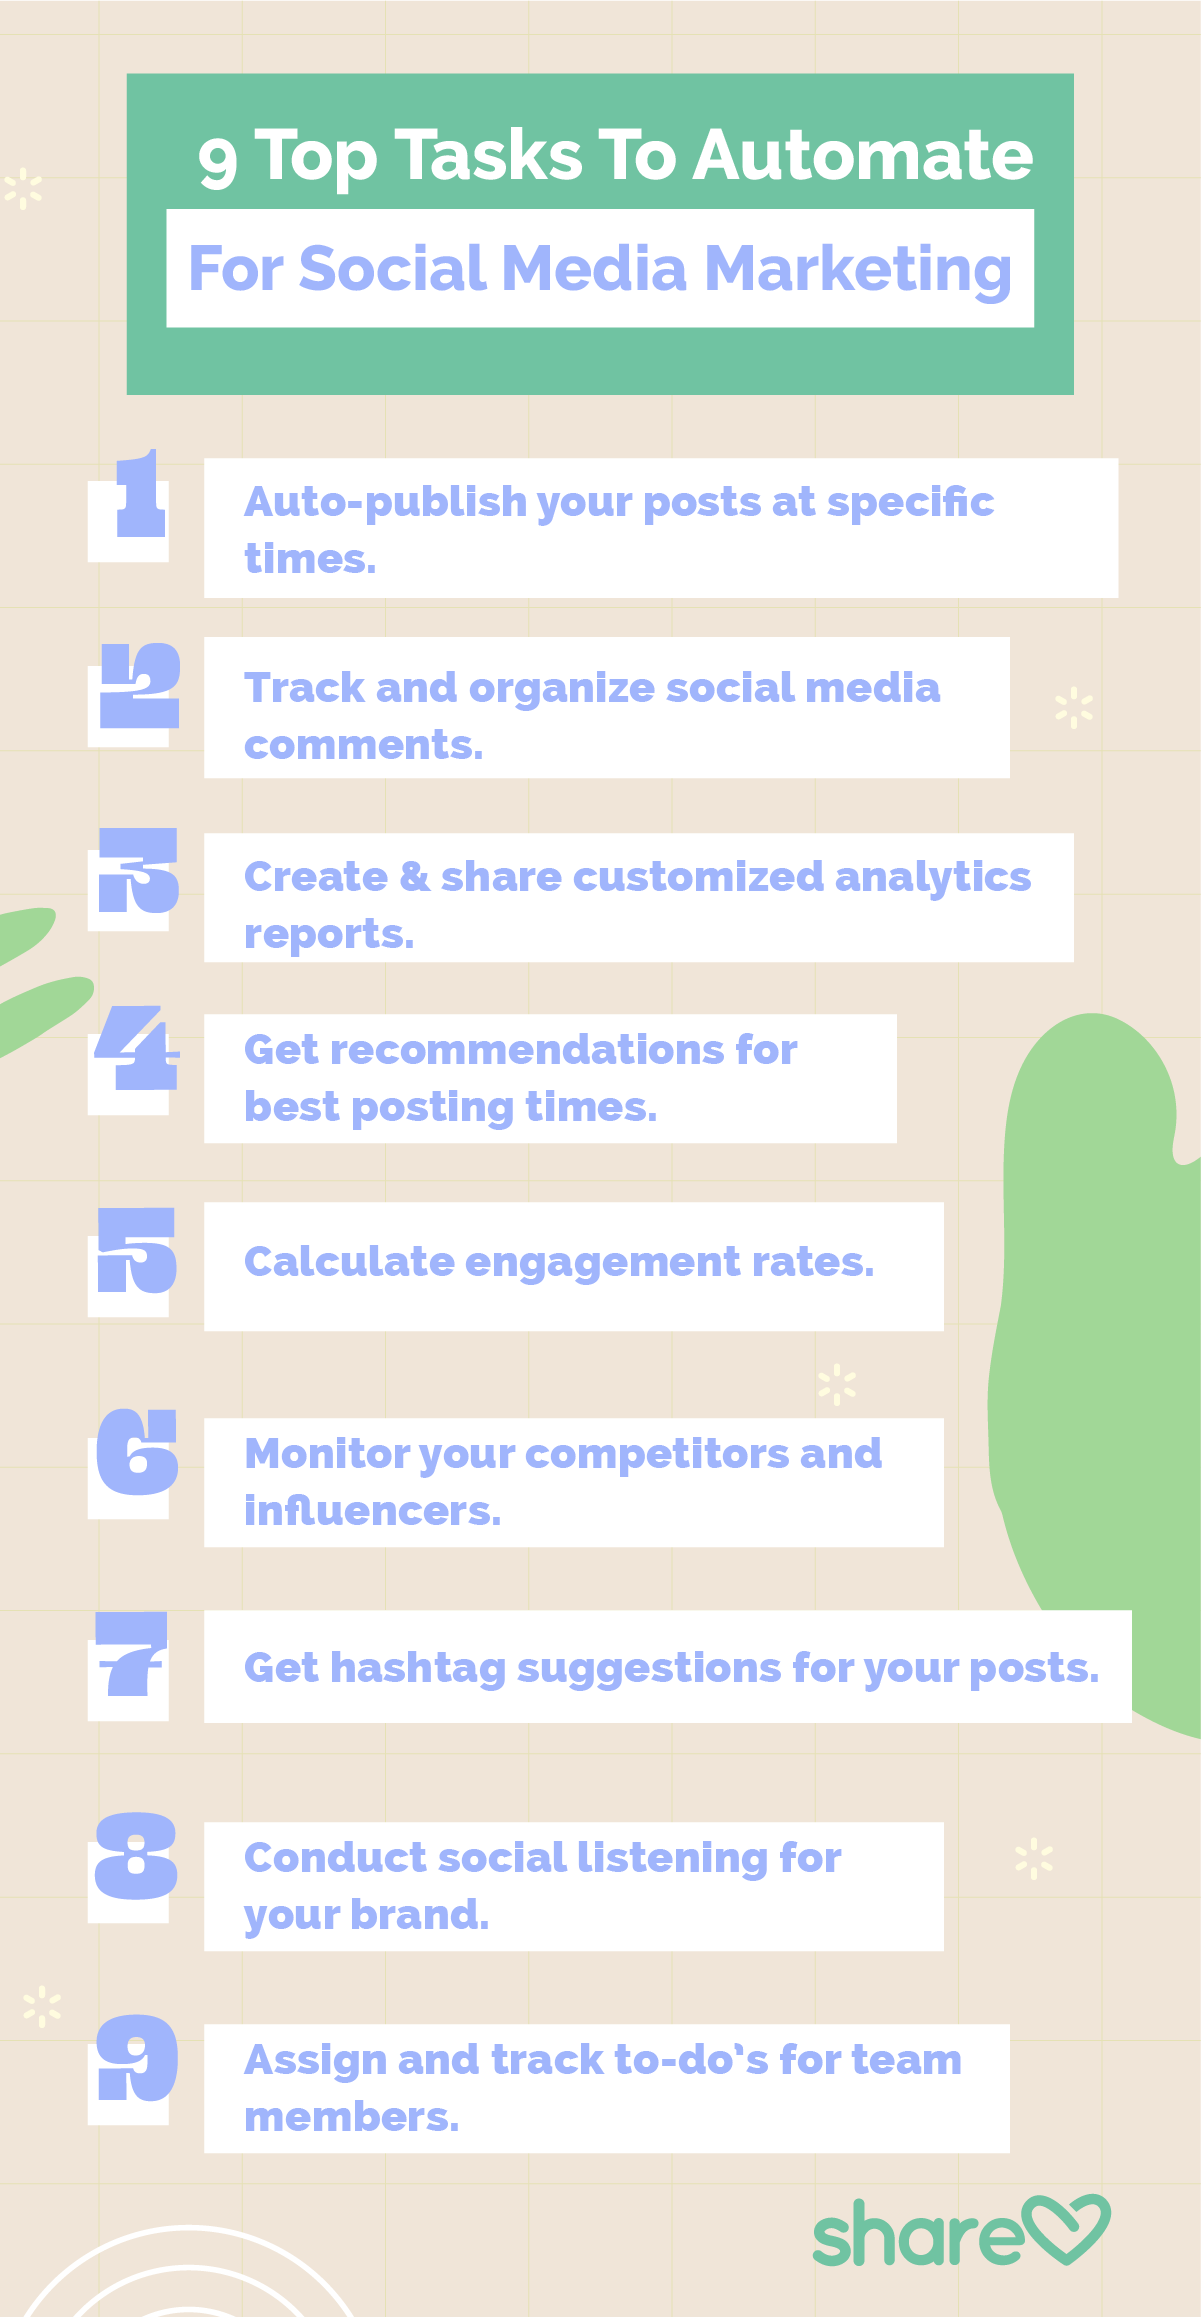 9 Top Tasks To Automate For Social Media Marketing